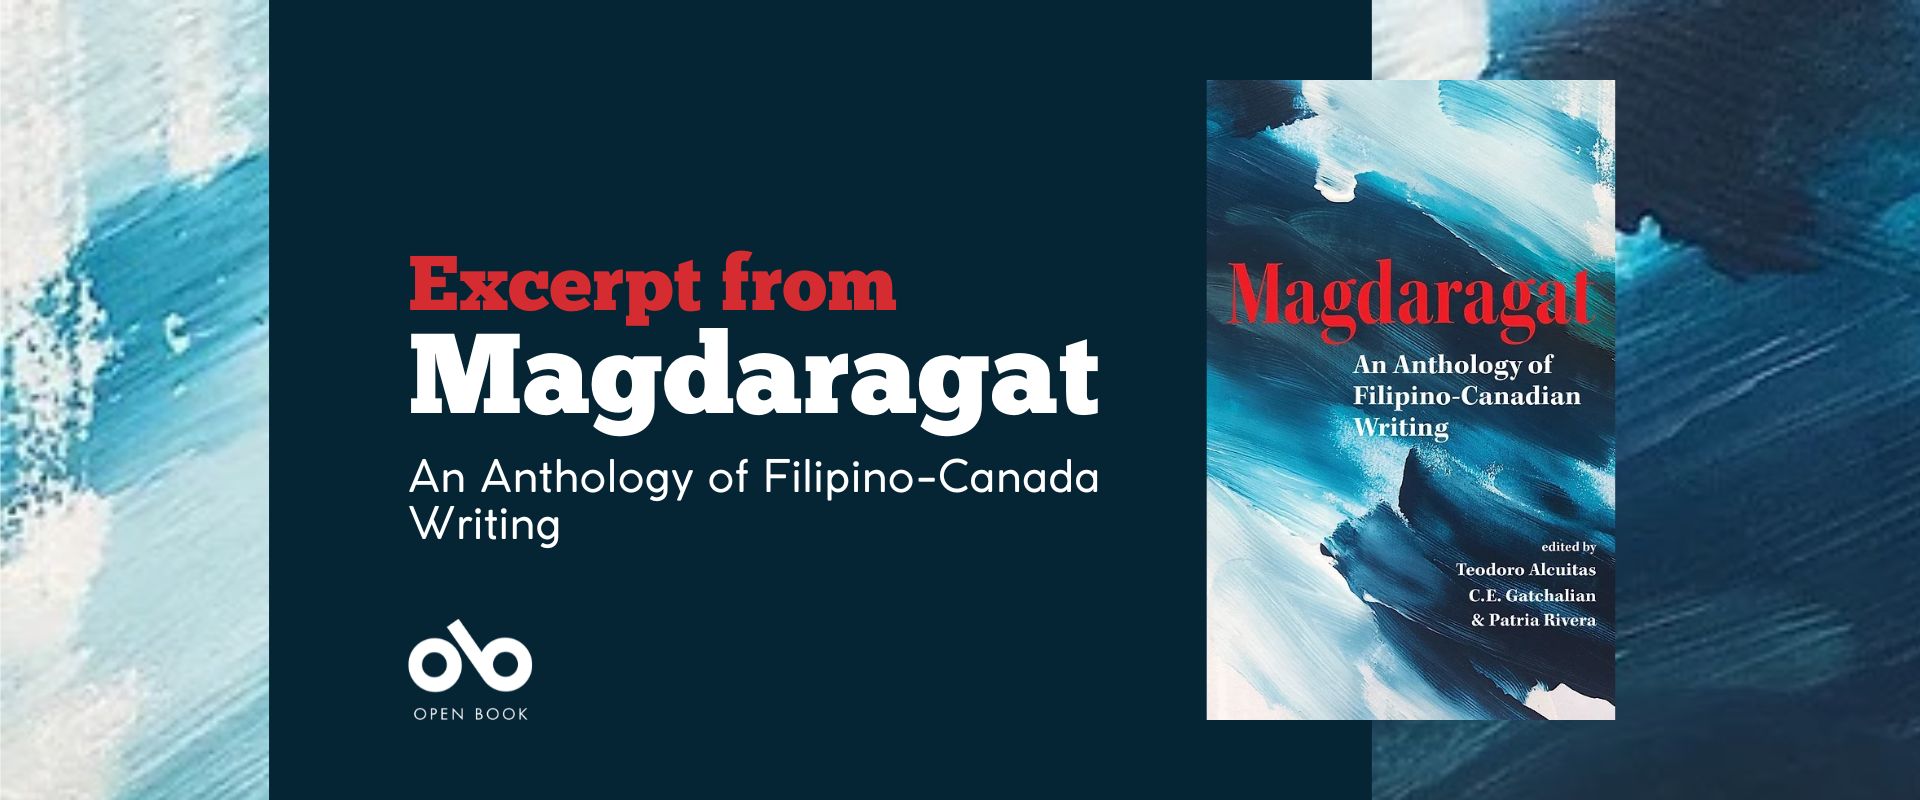 Blue banner image with text reading Excerpt from Magdaragat An Anthology of Filipino-Canada Writing